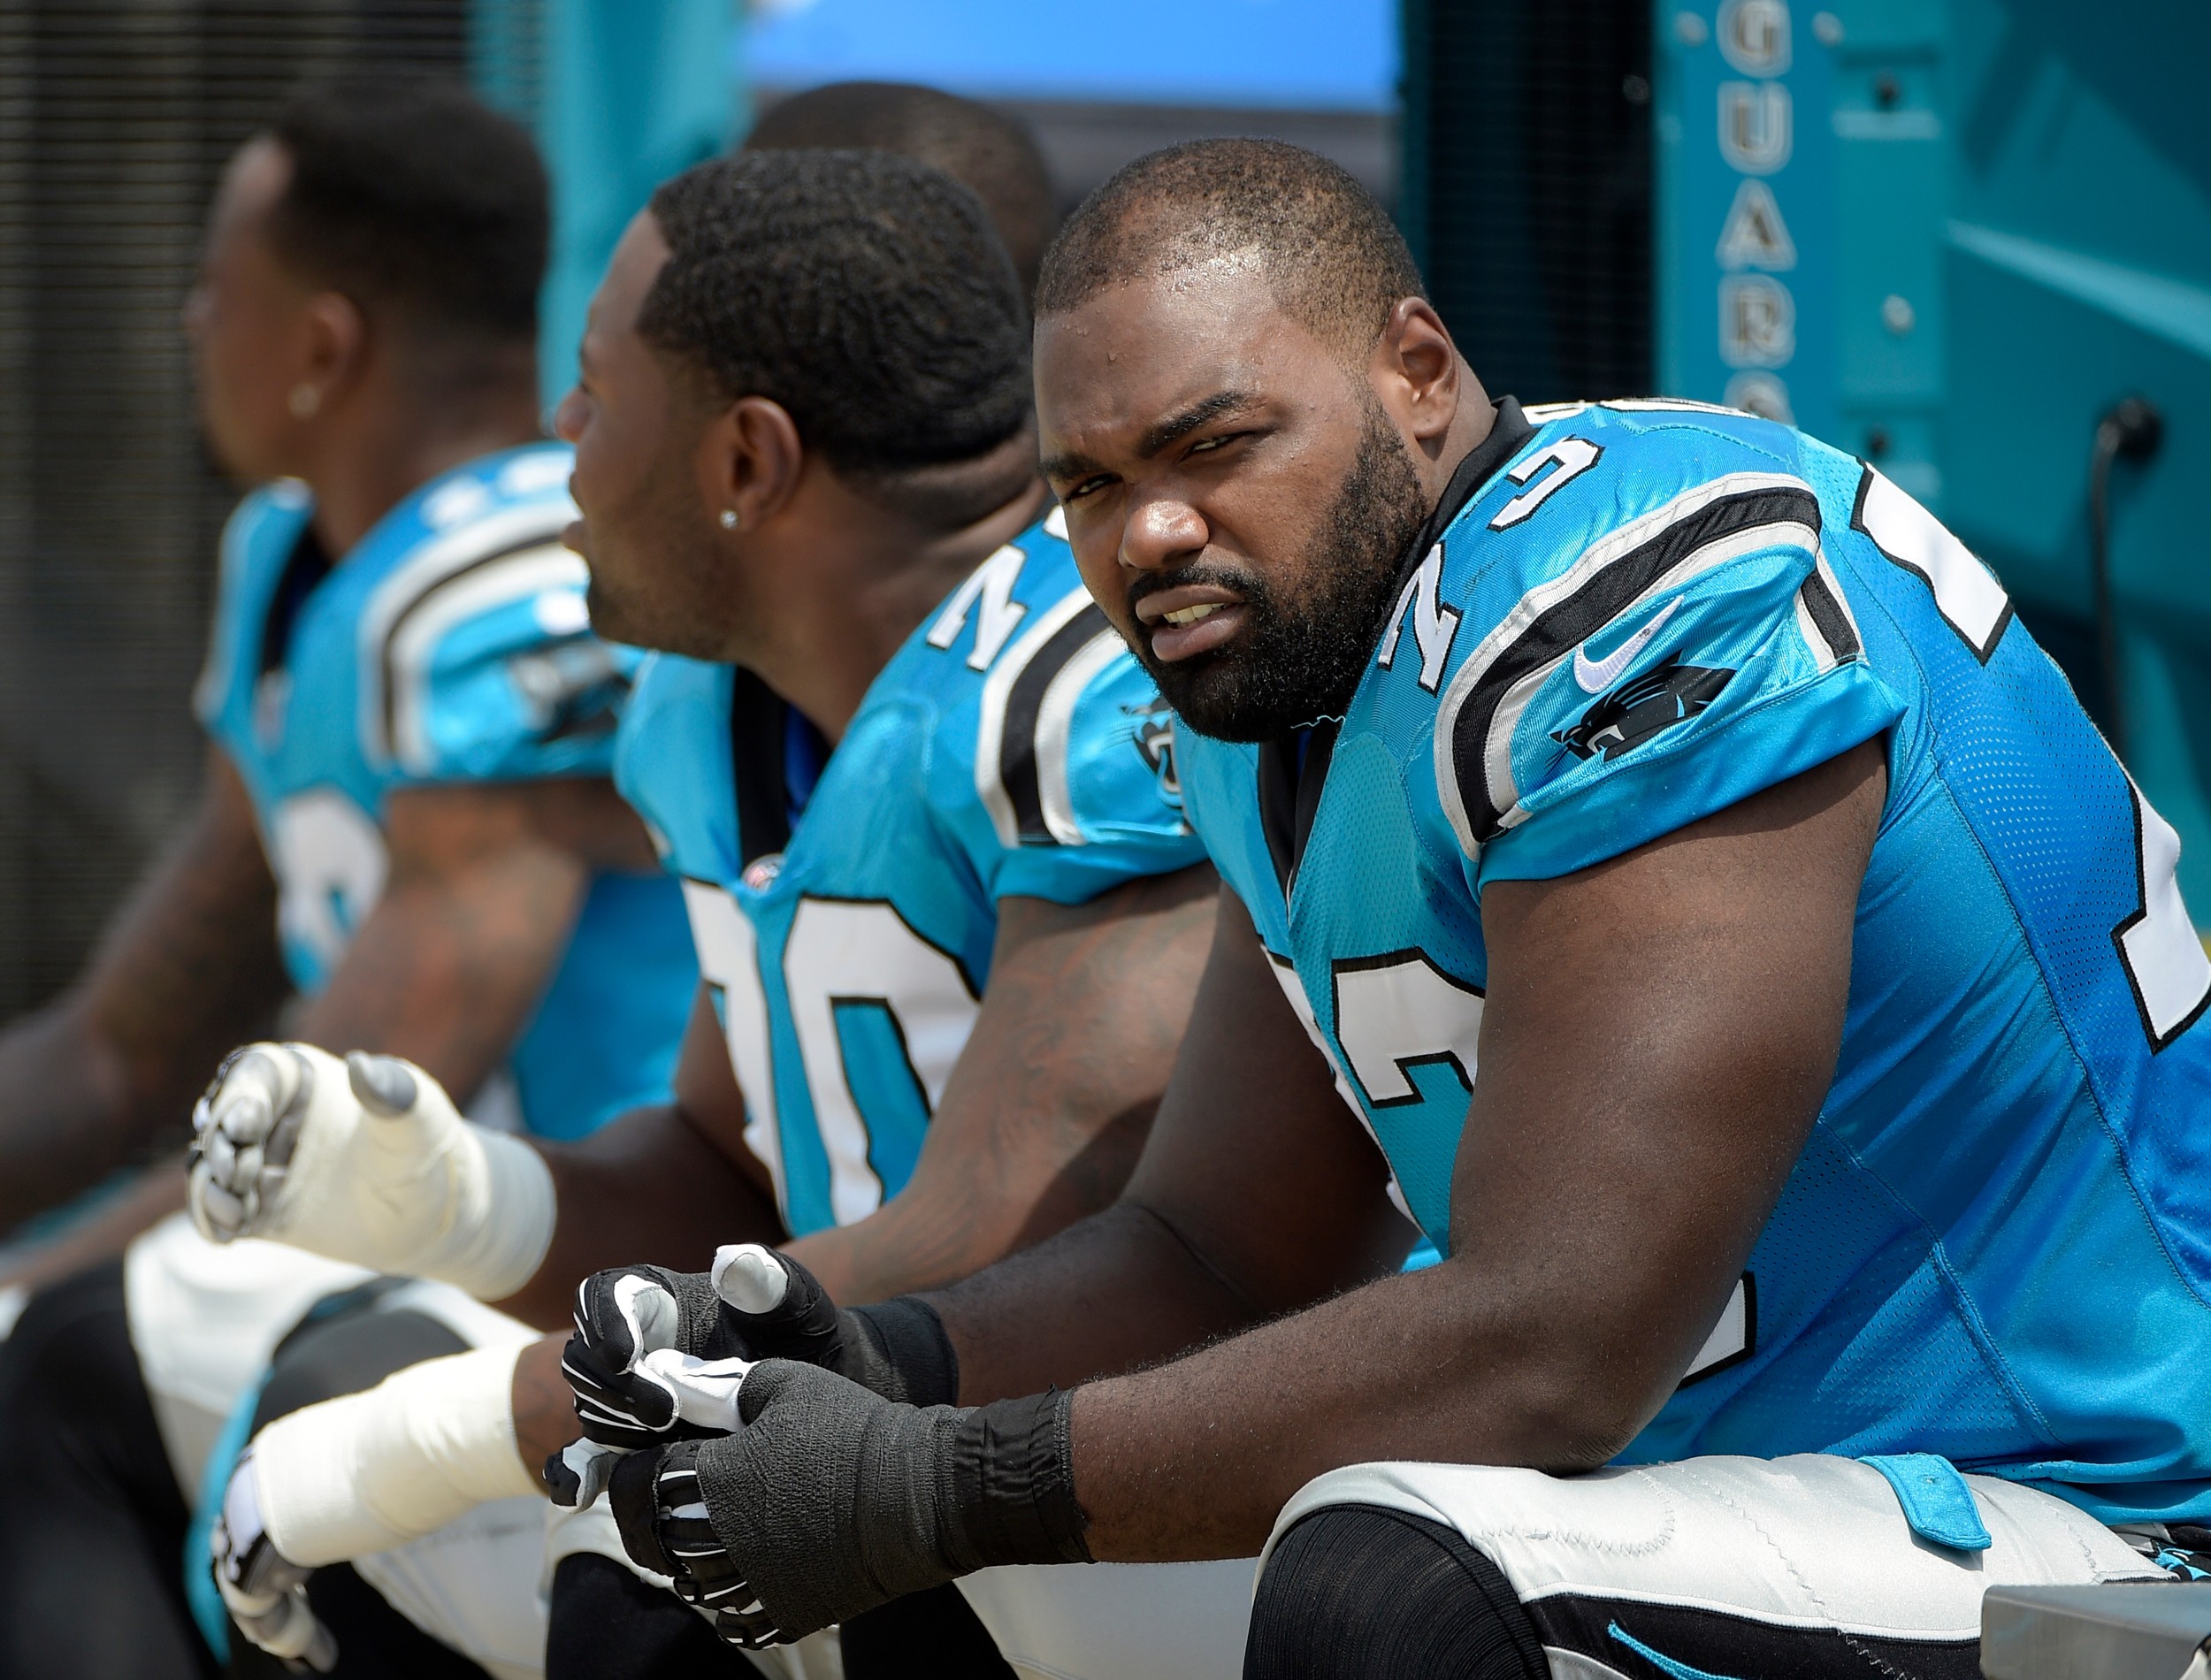 Newton to Oher: 'I need you' to play in Carolina | The Sumter Item